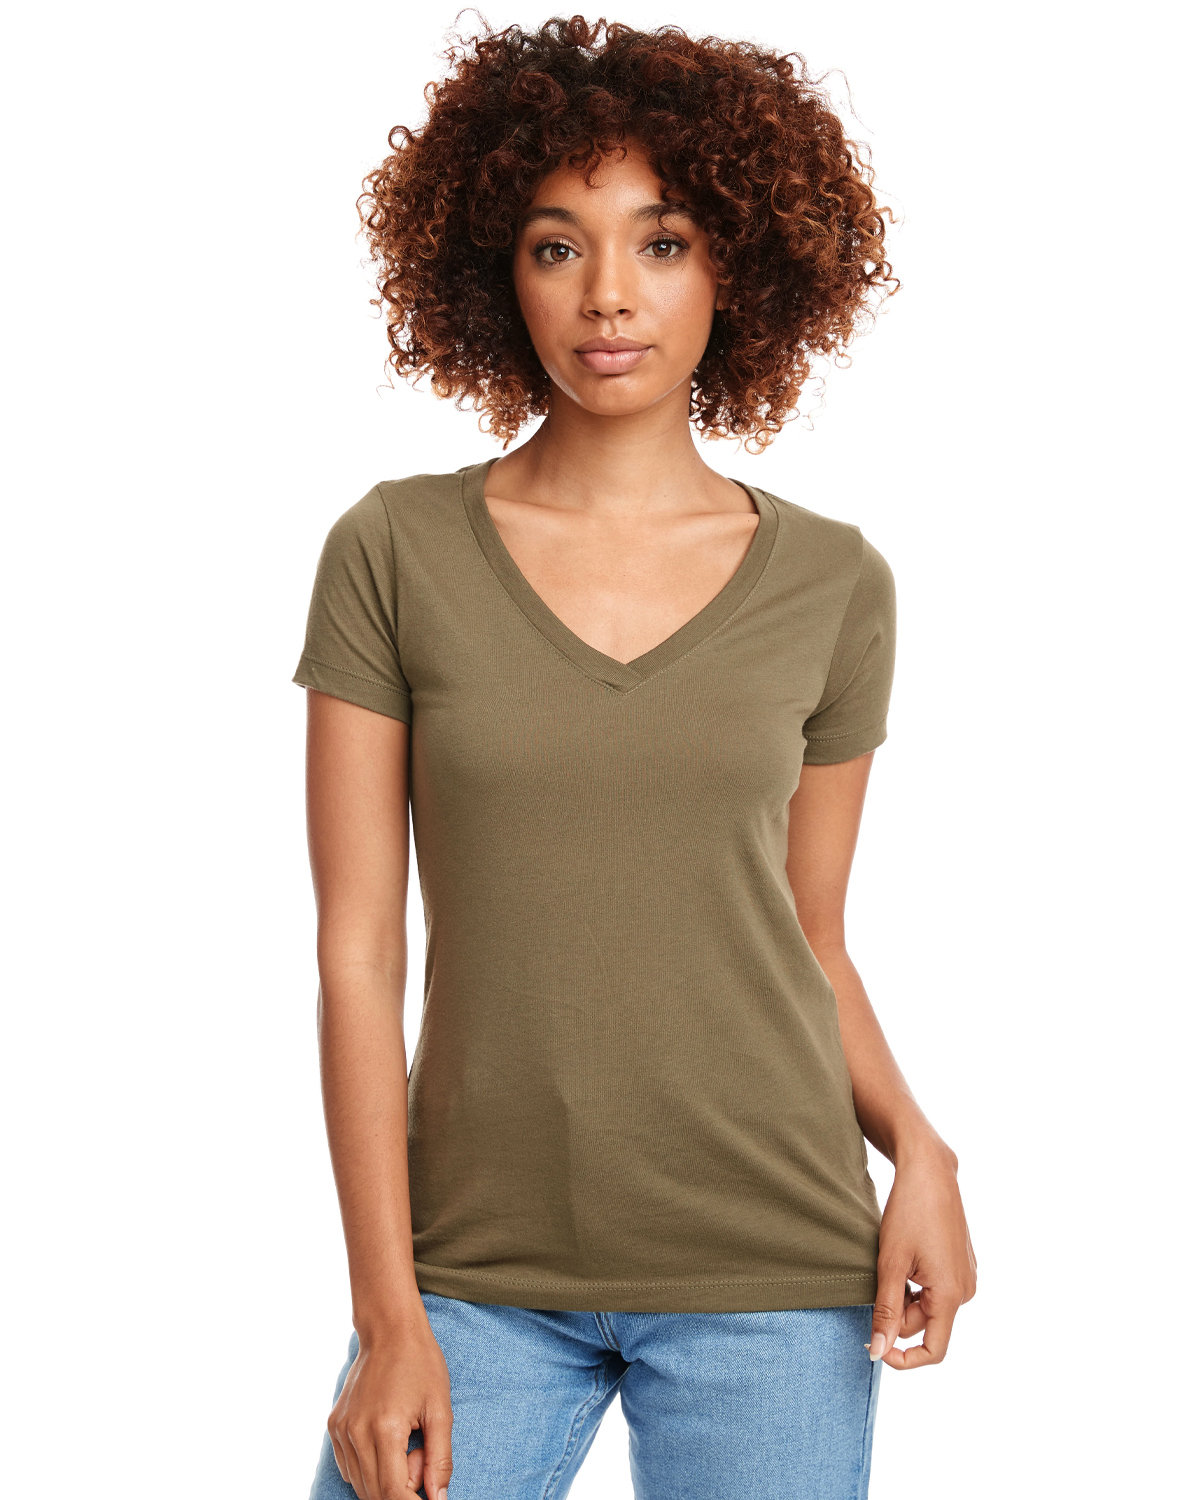 Next Level Apparel Ladies' Ideal V military green 